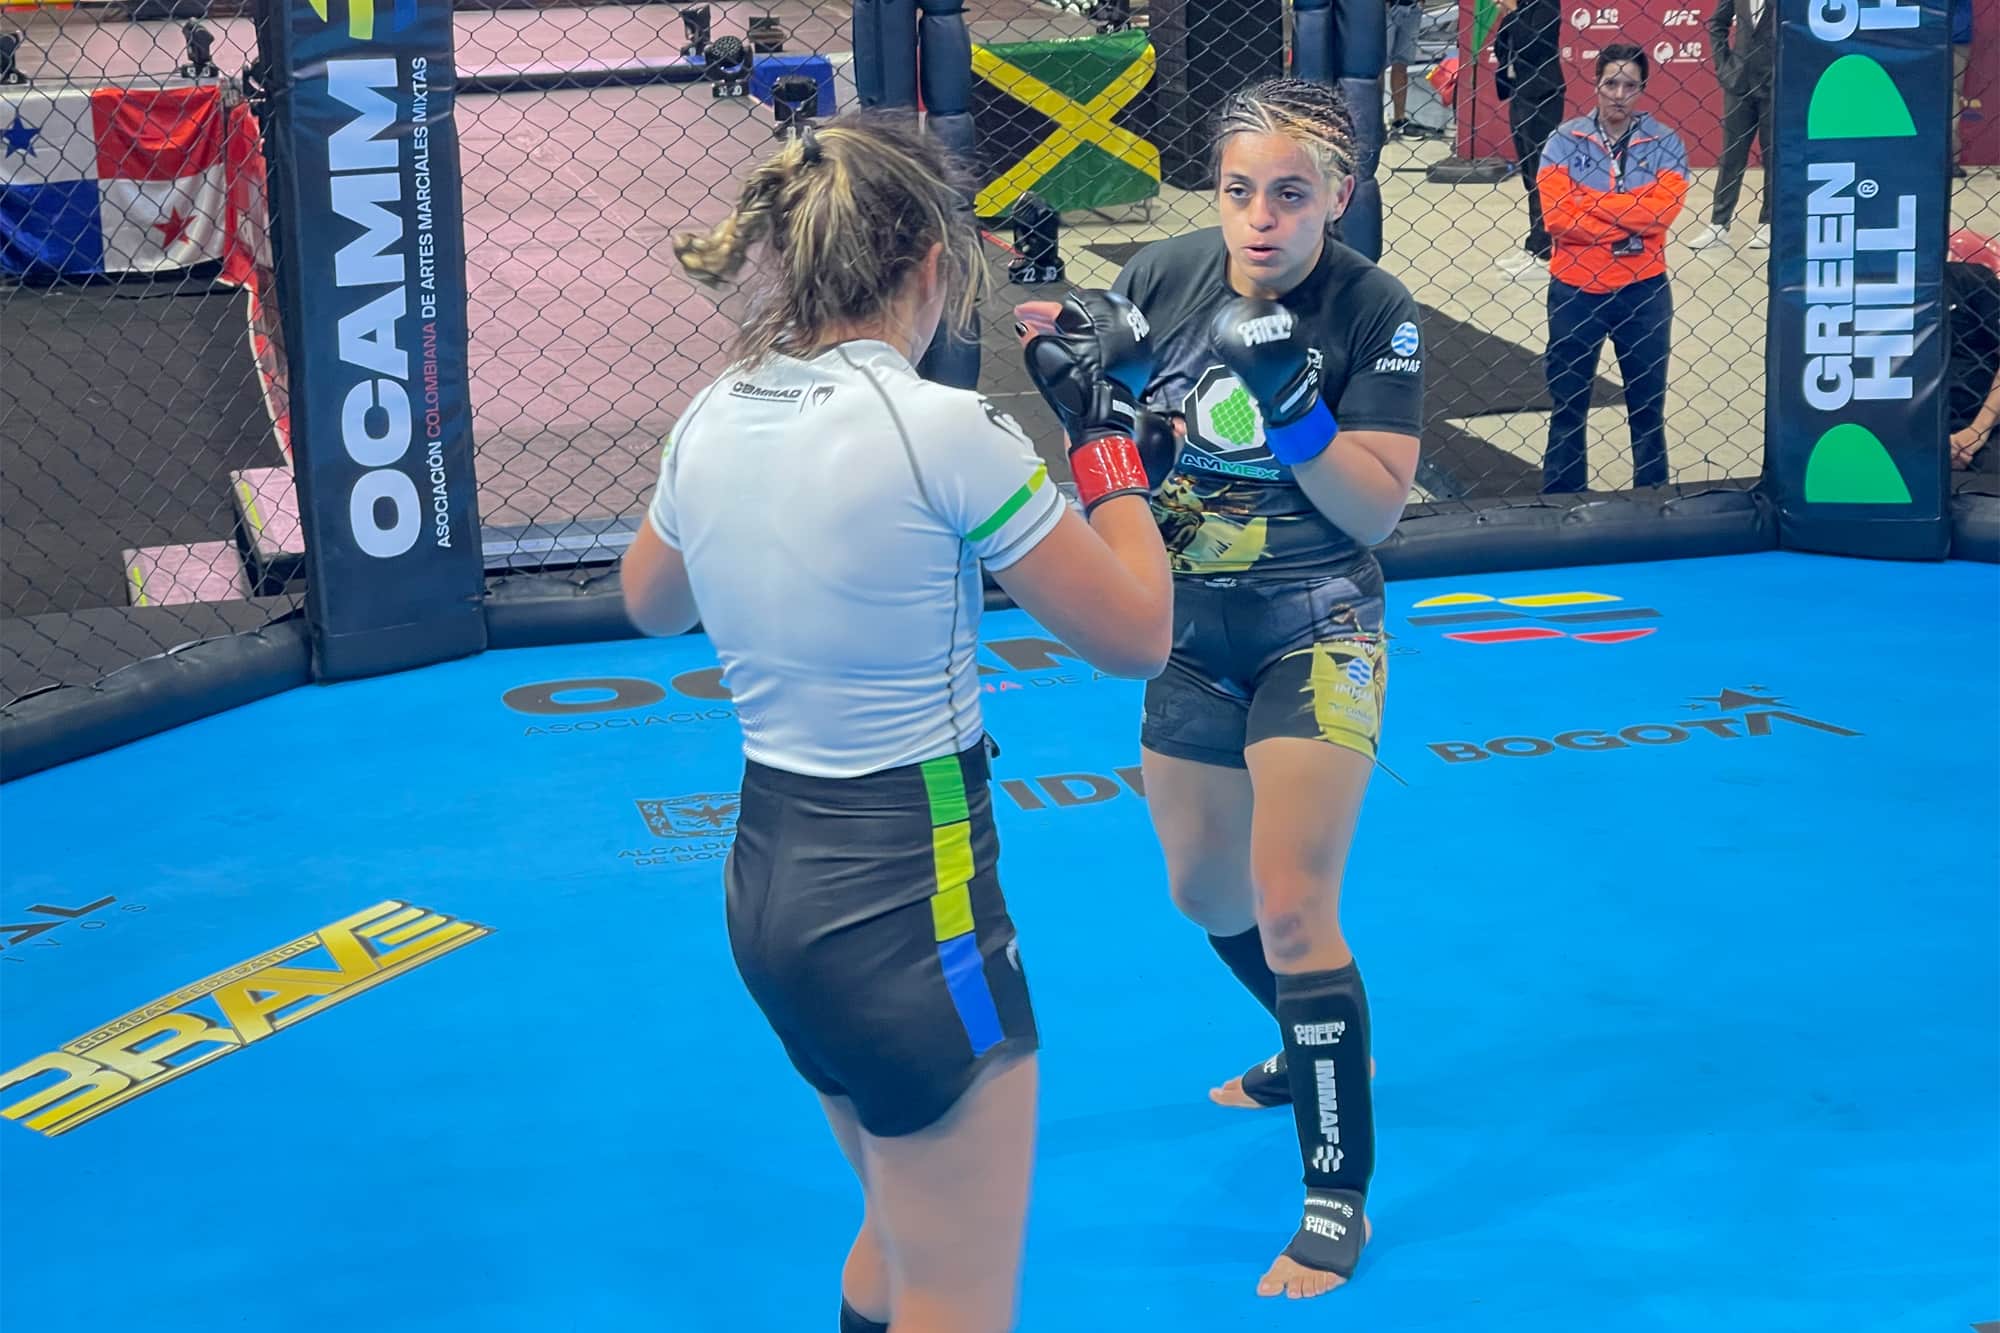 Samantha Onate leads the charge for a successful Day 2 for Mexico at the 2023 IMMAF Pan American Championships